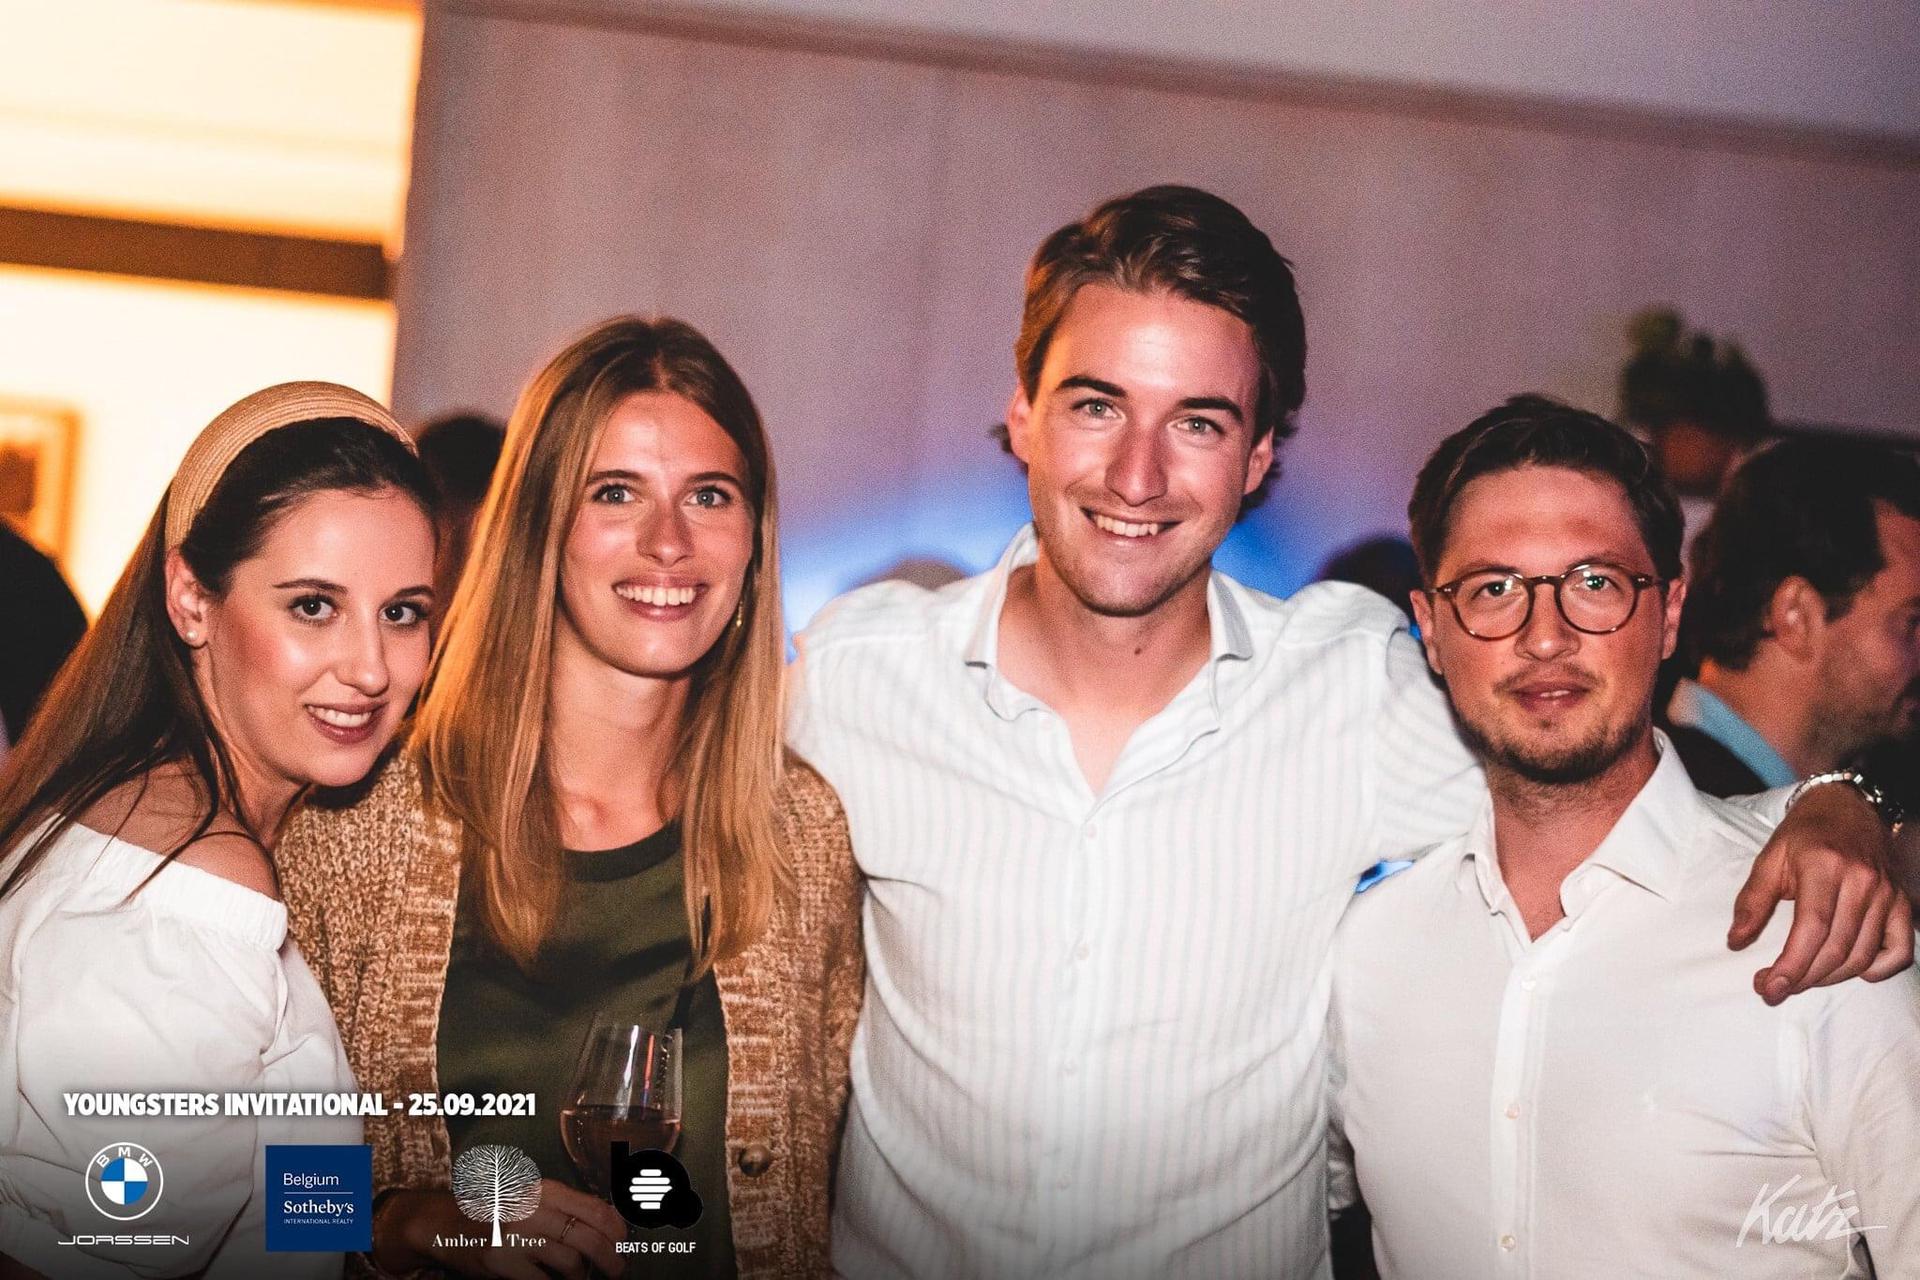 The Sotheby's International Realty team present at the event after the tournament organized by the Rinkven's golf club